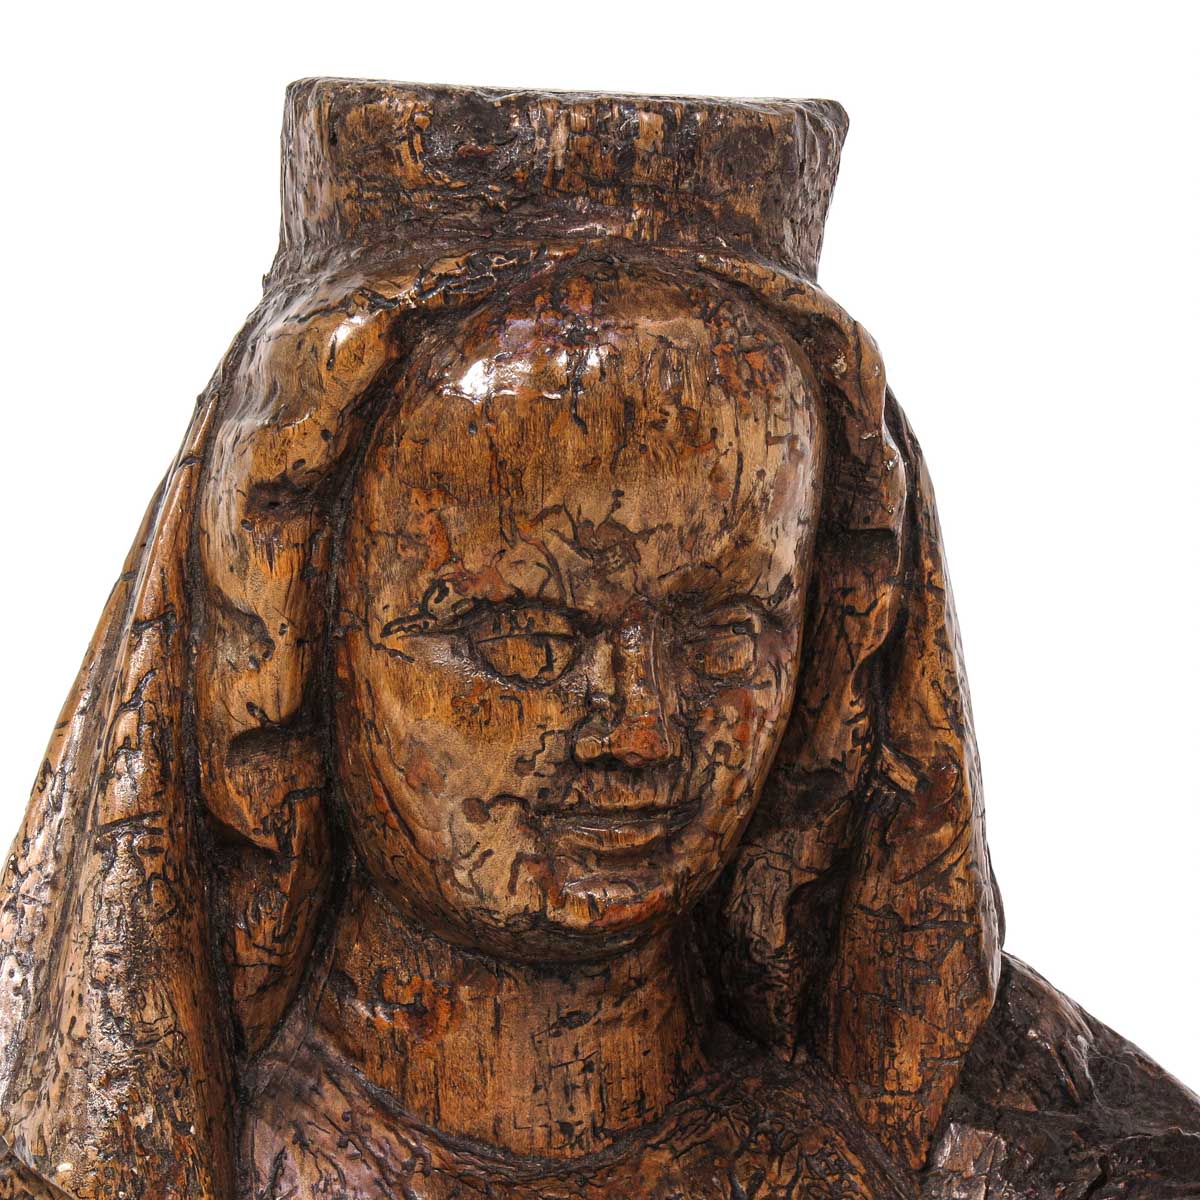 A 14th Century Sculpture of Madonna and Child - Image 6 of 10